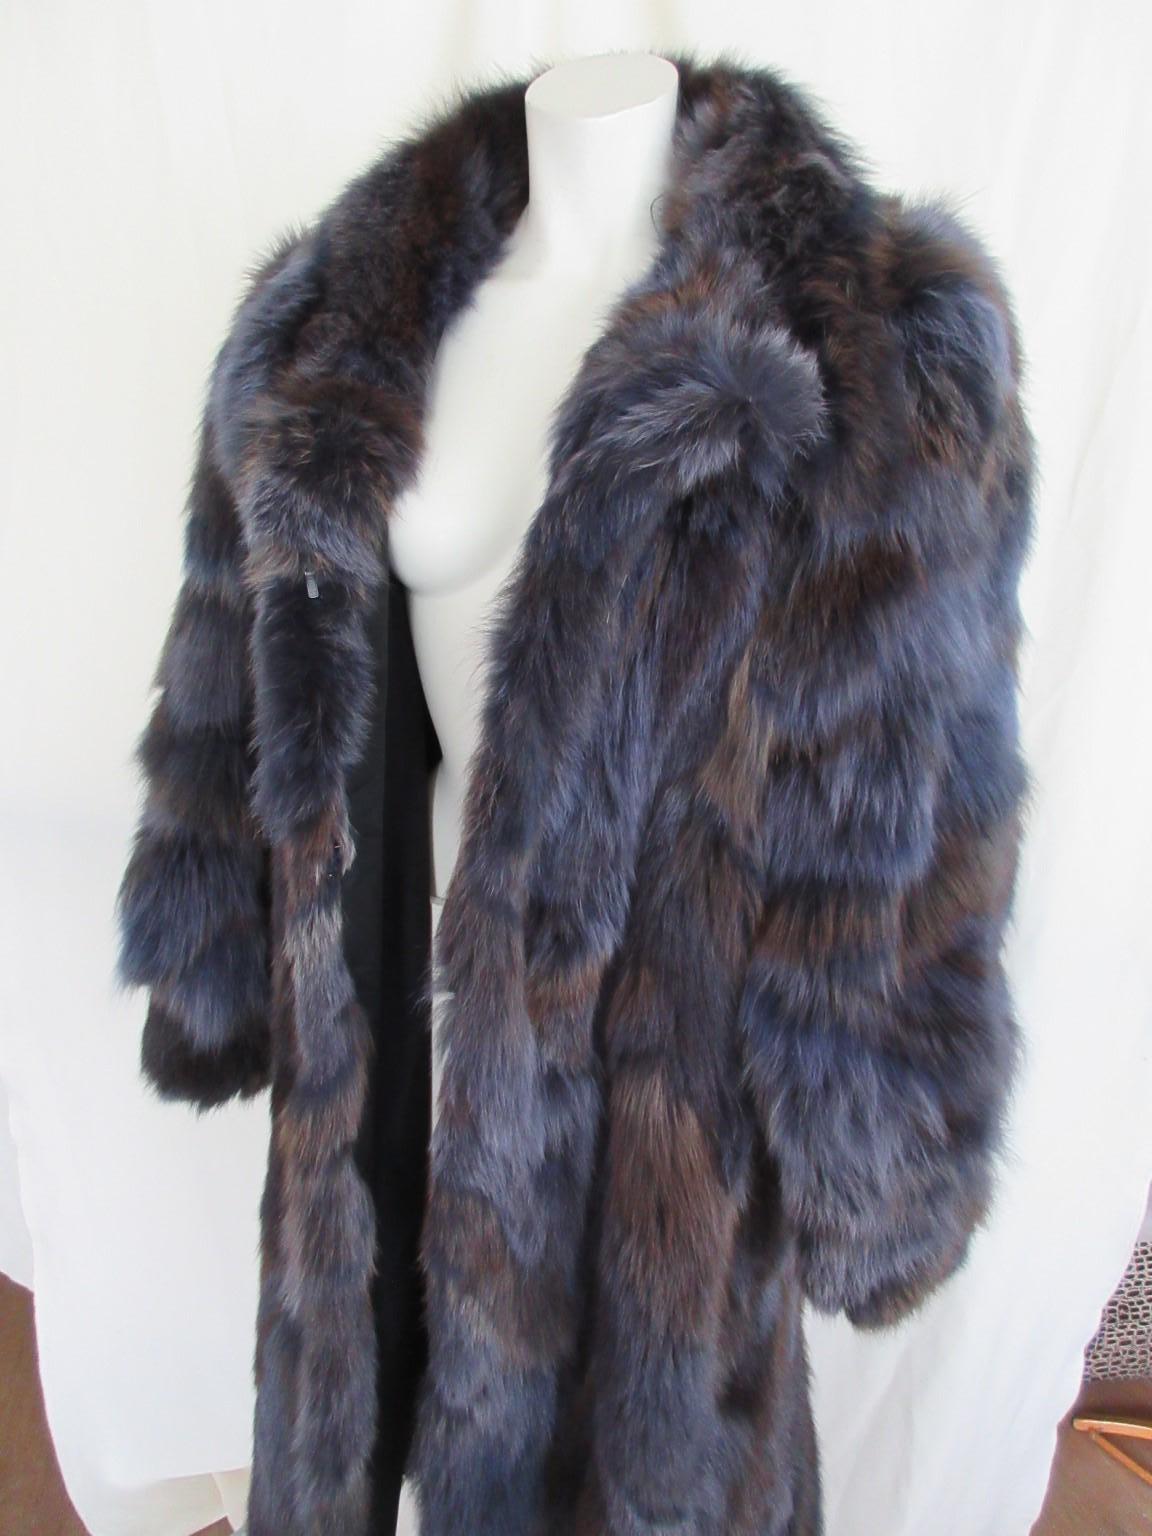 We offer more exclusive vintage fur items, view our frontstore

Details:
This vintage coat is dyed in a special blue/grey/brown color fox fur
with 2 pockets , 1 collar button and 3 closing hooks.
The quality of the fox fur is very soft and light to